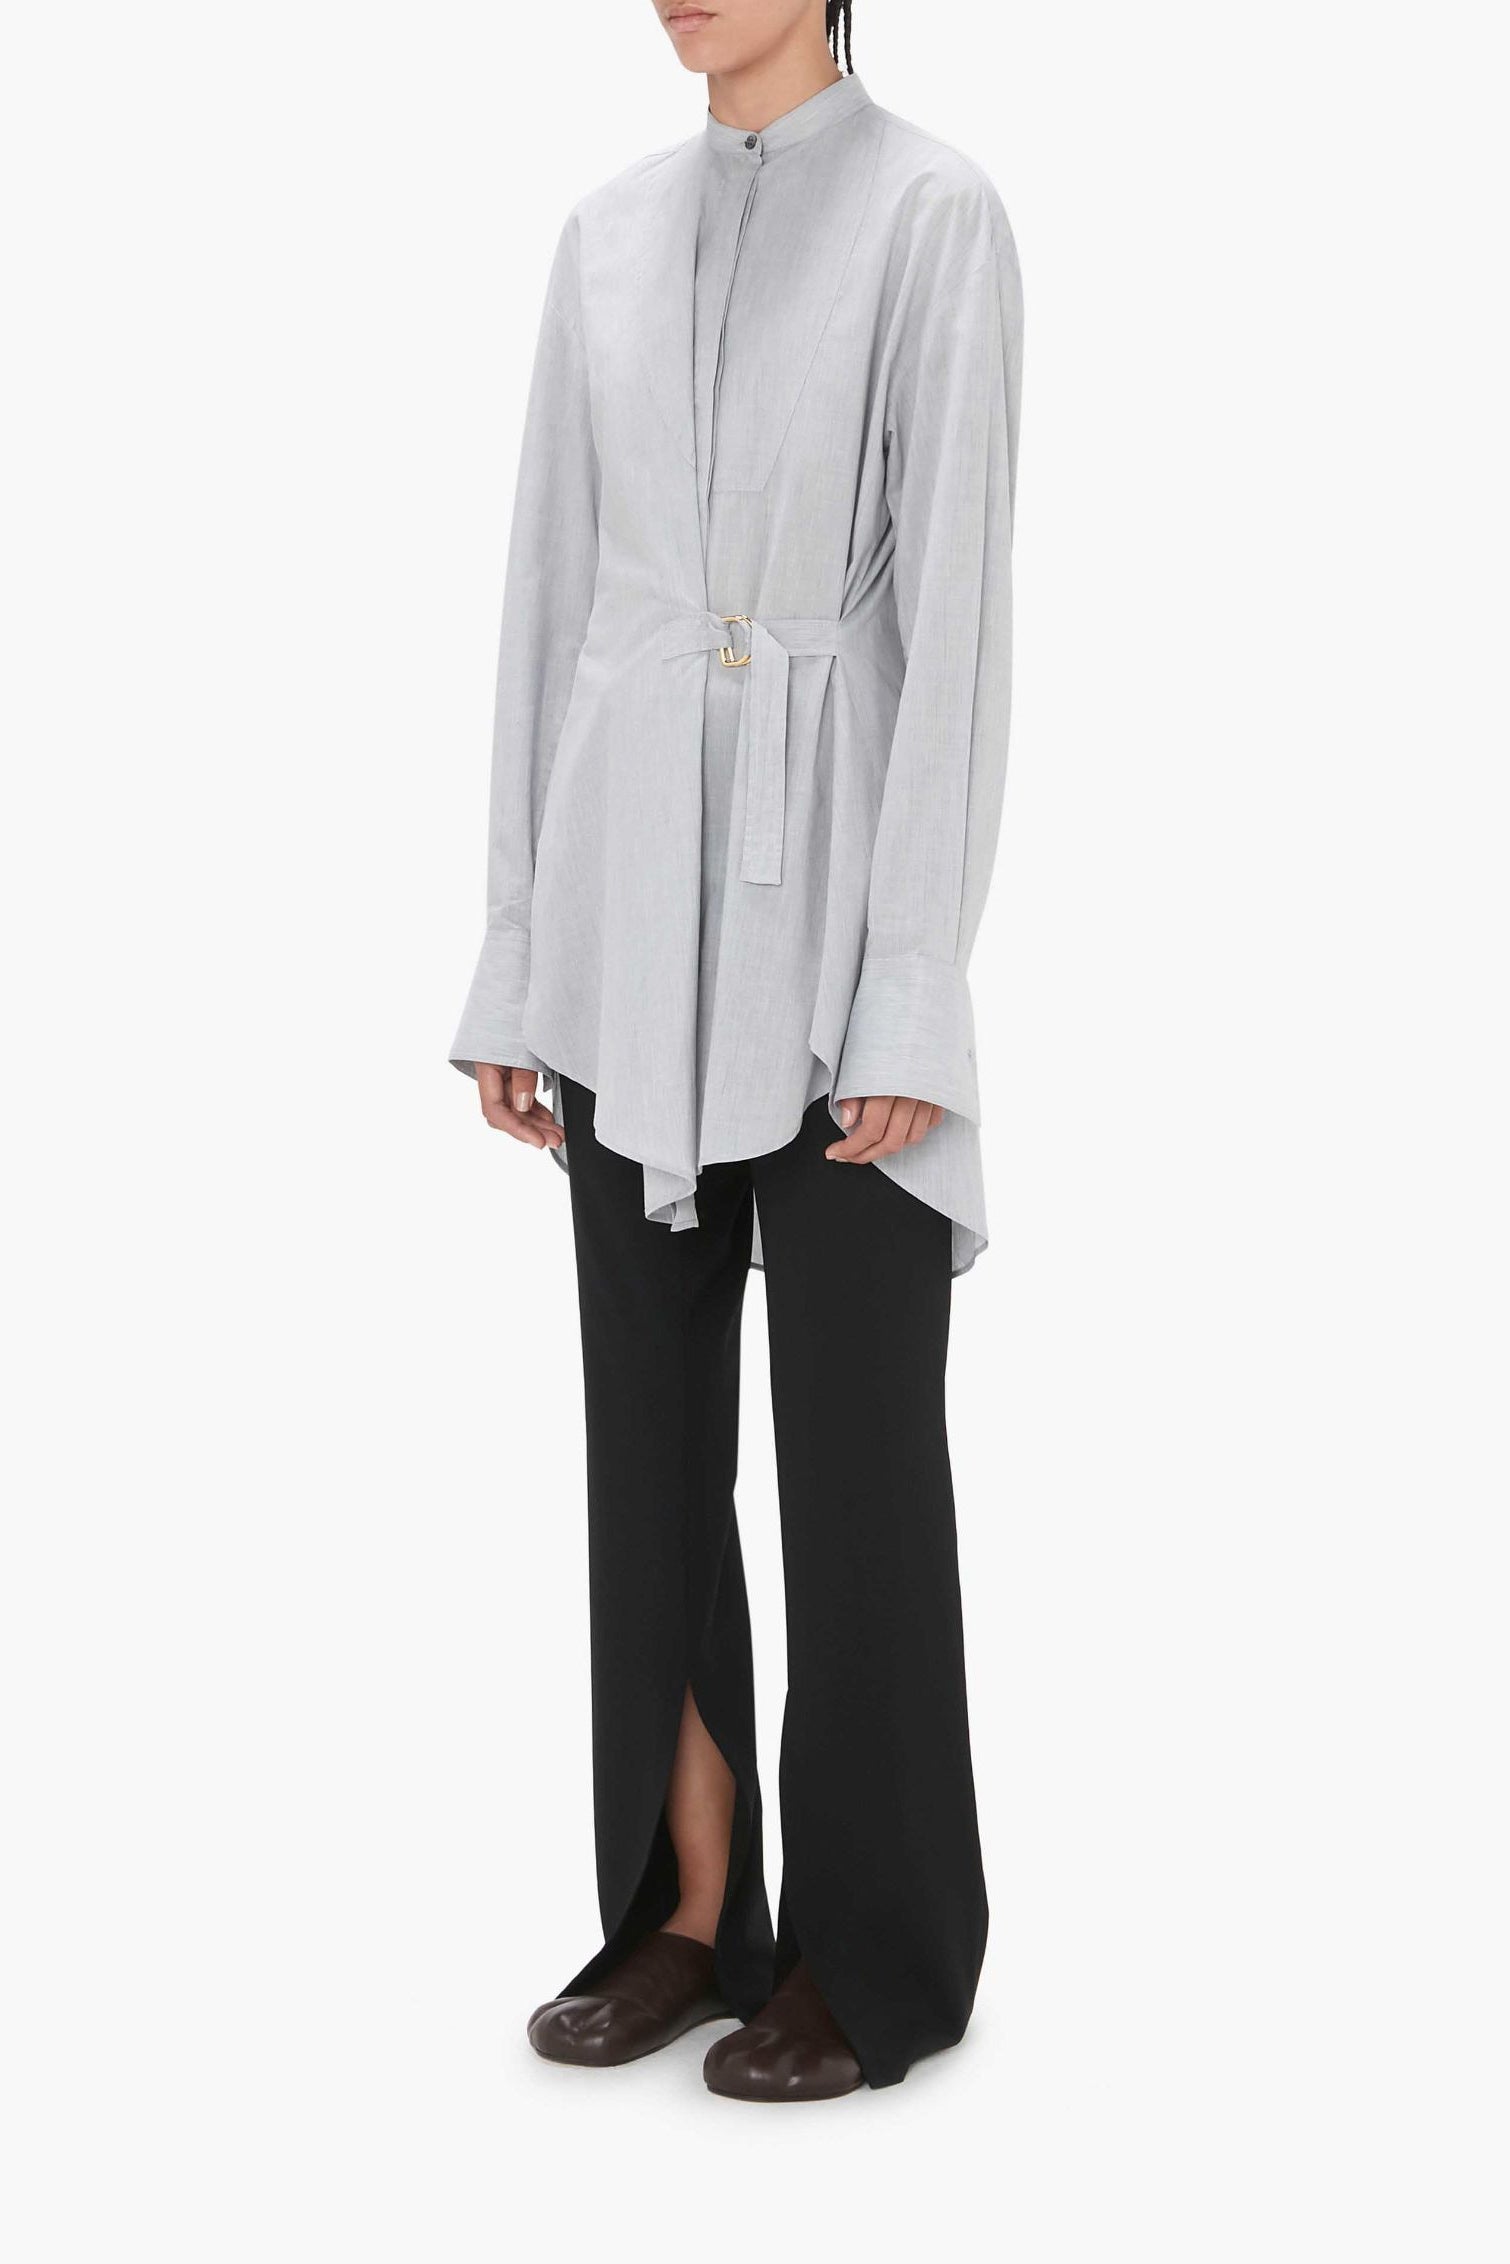 Bluse Twisted in Grey MelangeJW Anderson - Anita Hass